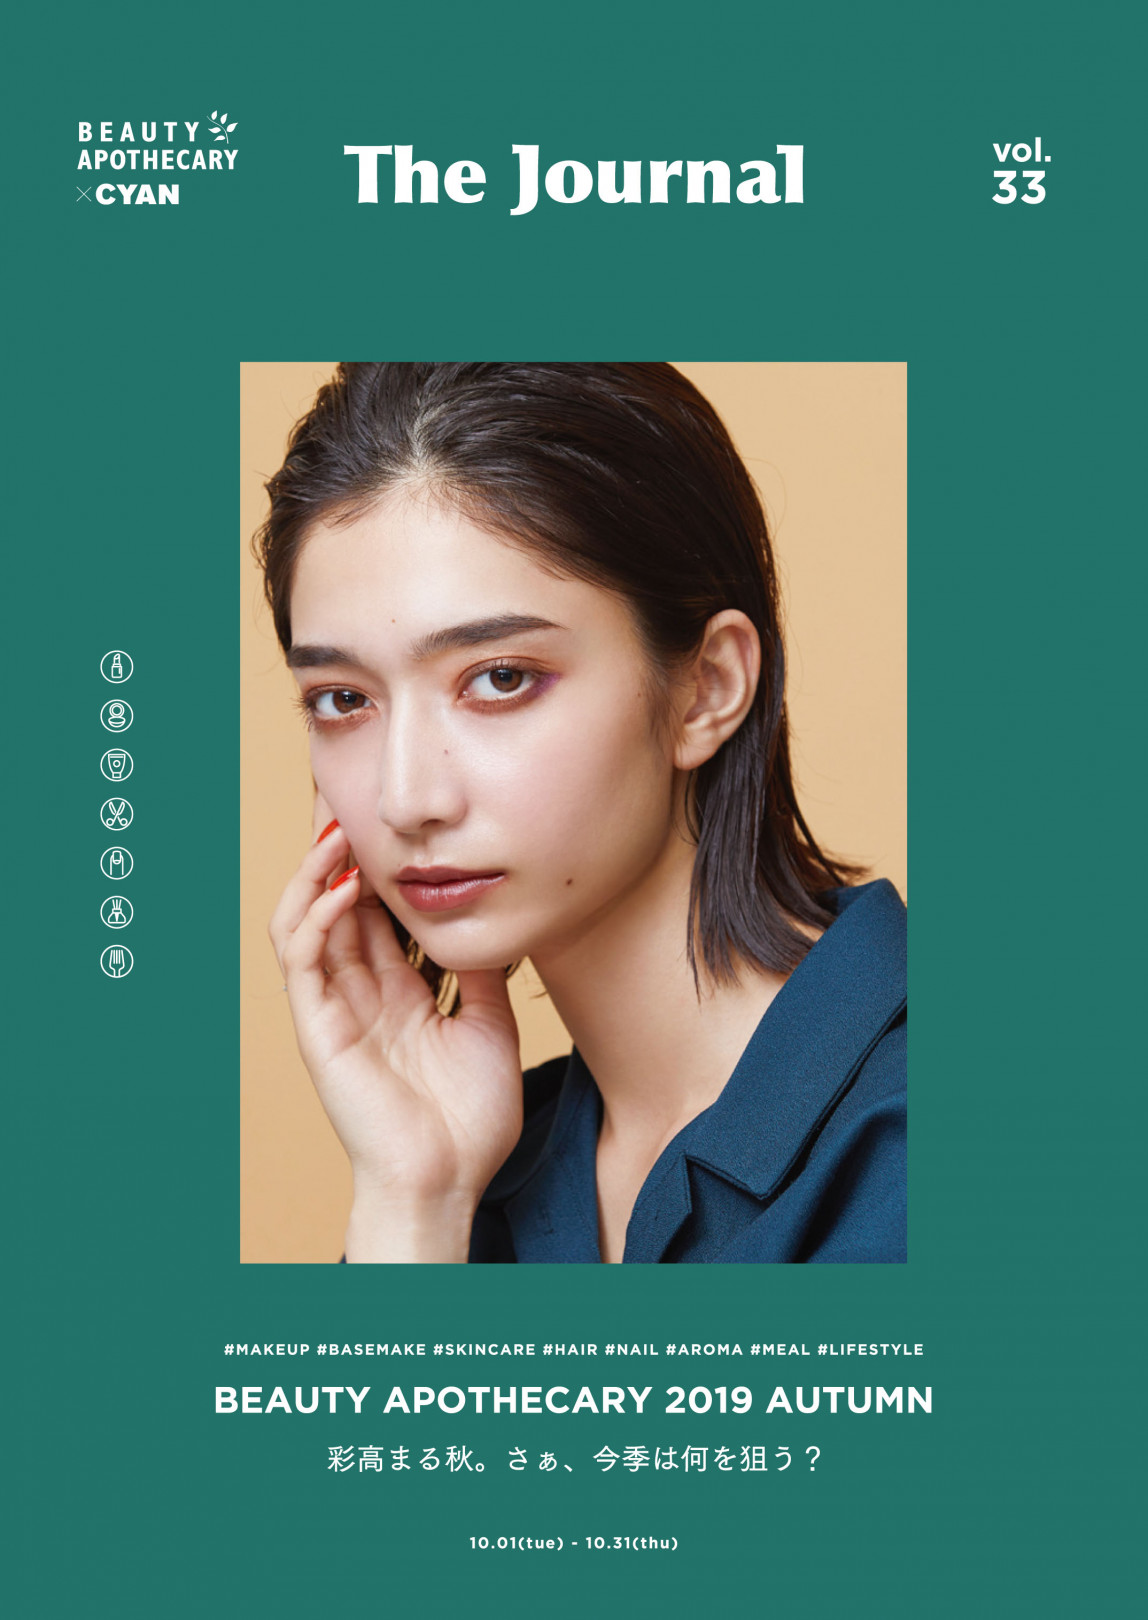 BEAUTY APOTHECARY×CYAN 2019 Autumn Recommendation